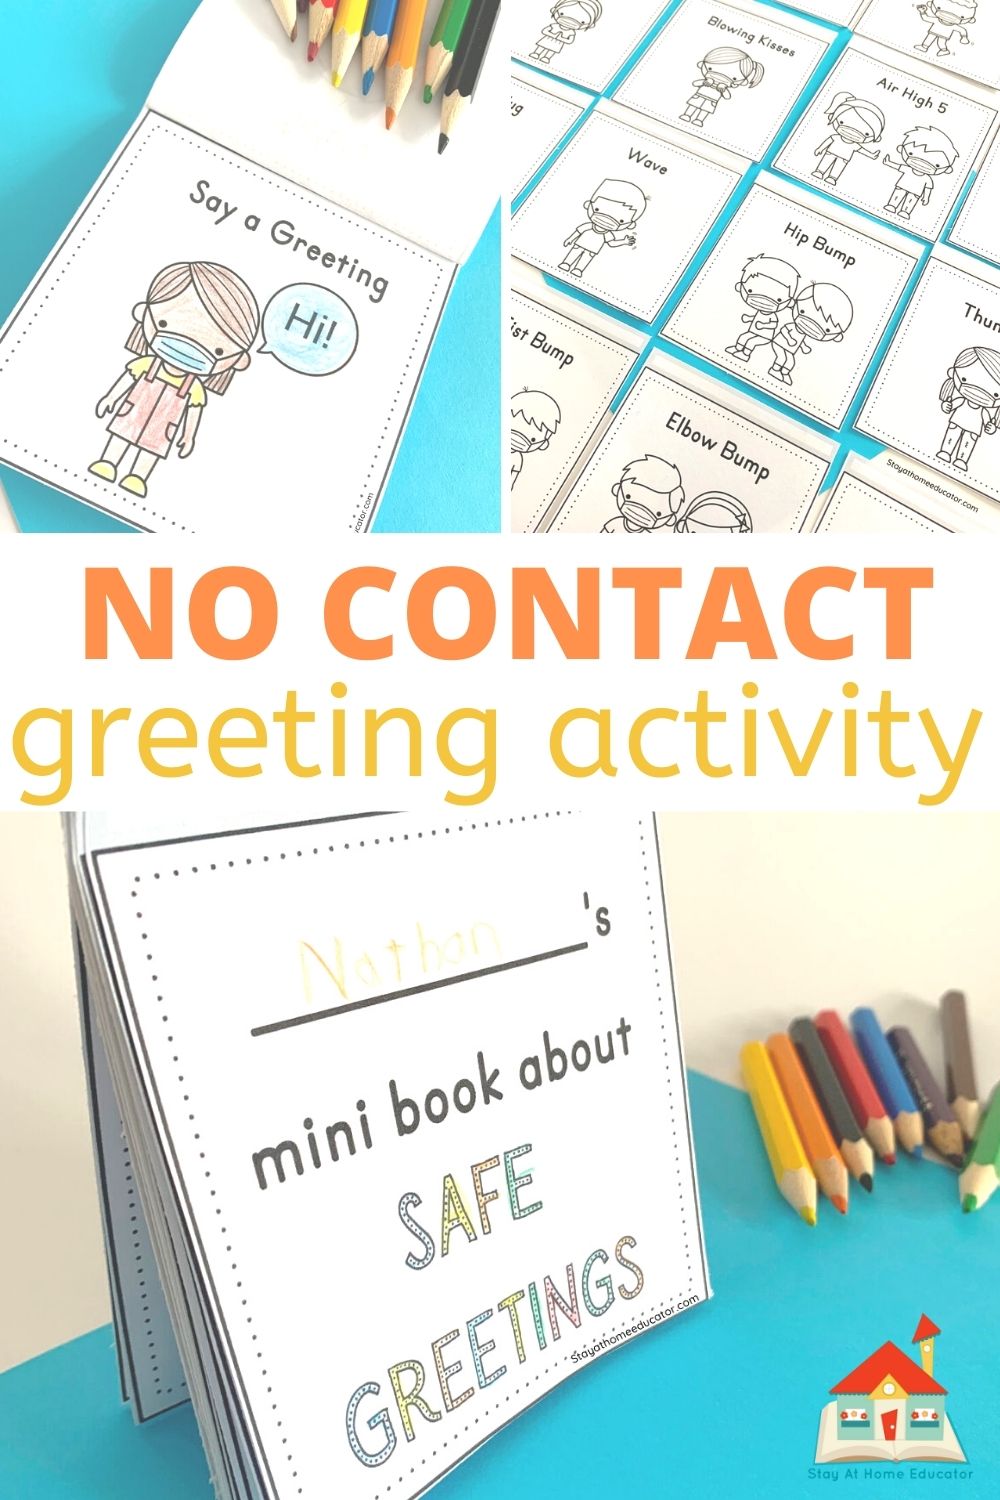 how to teach safe greetings to preschoolers with free printable safe greetings mini book